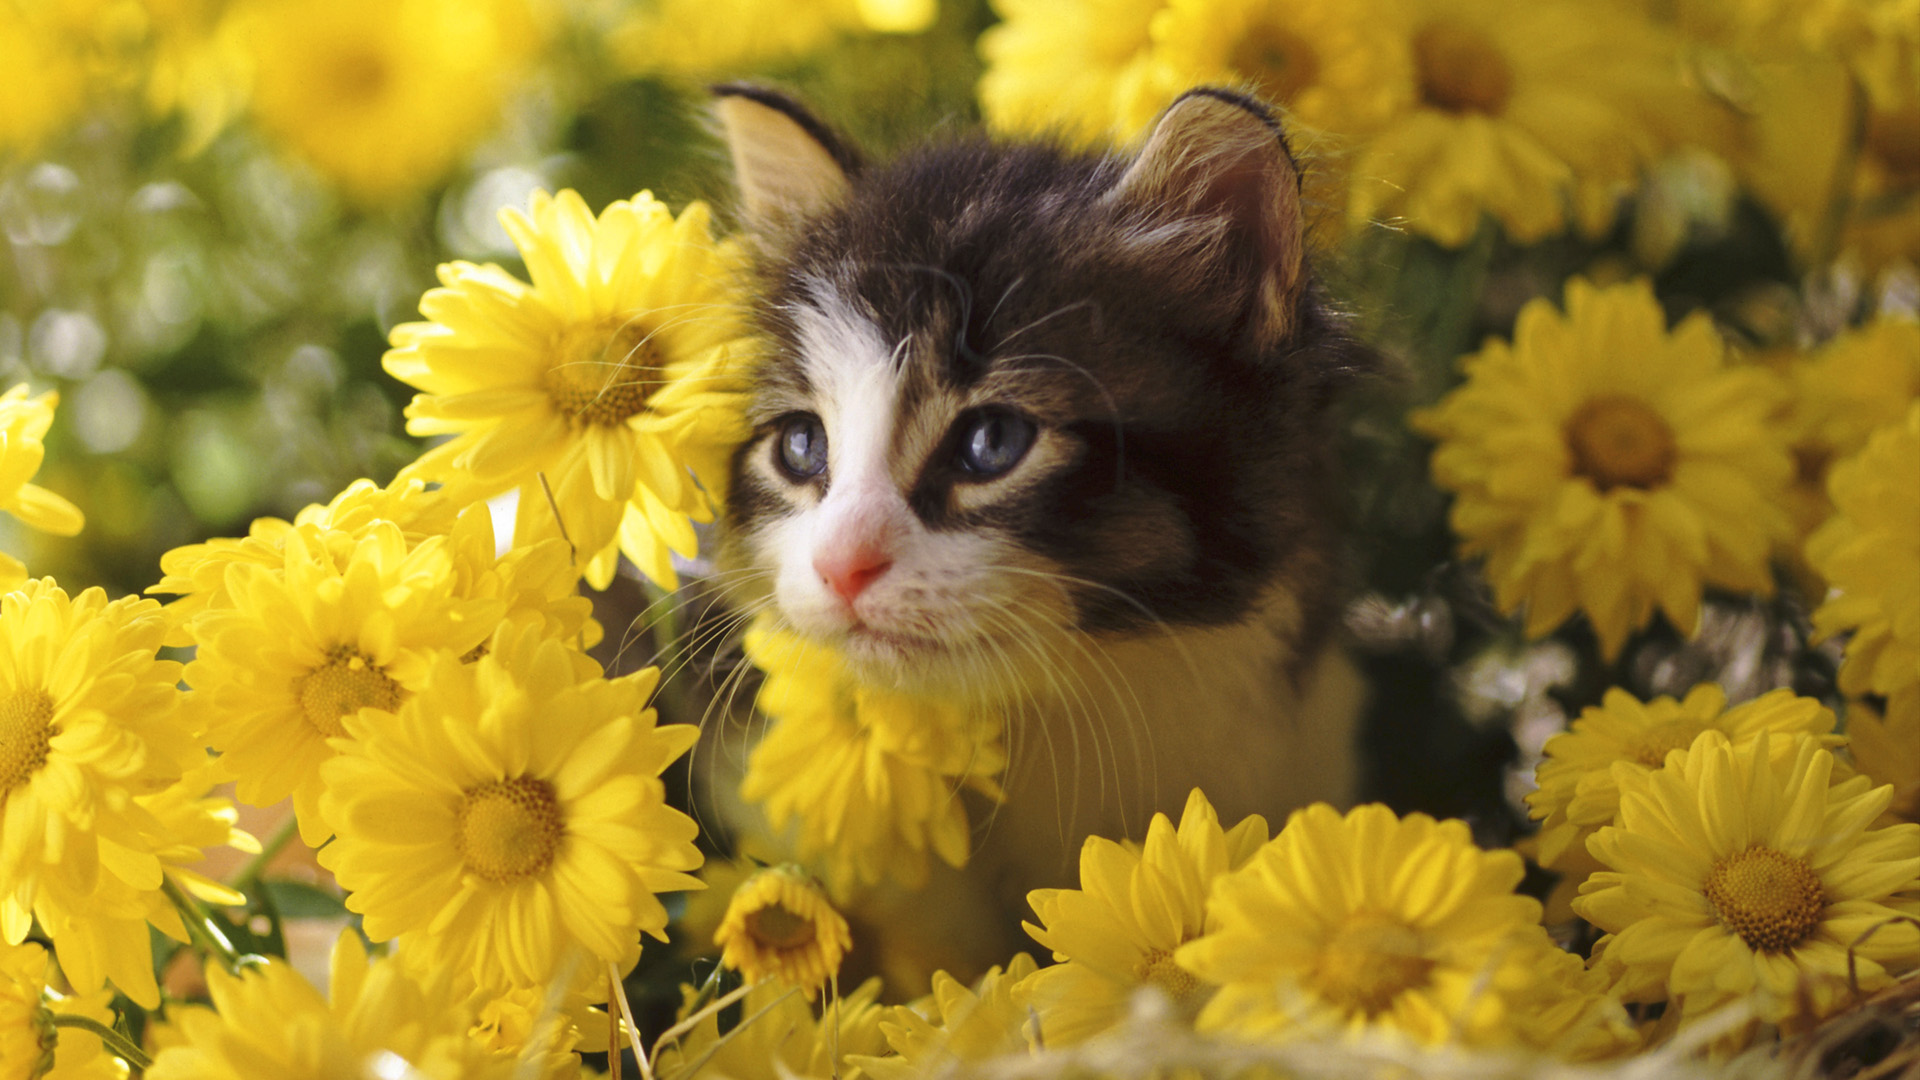 cat hd wallpaper 1920x1080,cat,small to medium sized cats,felidae,yellow,whiskers